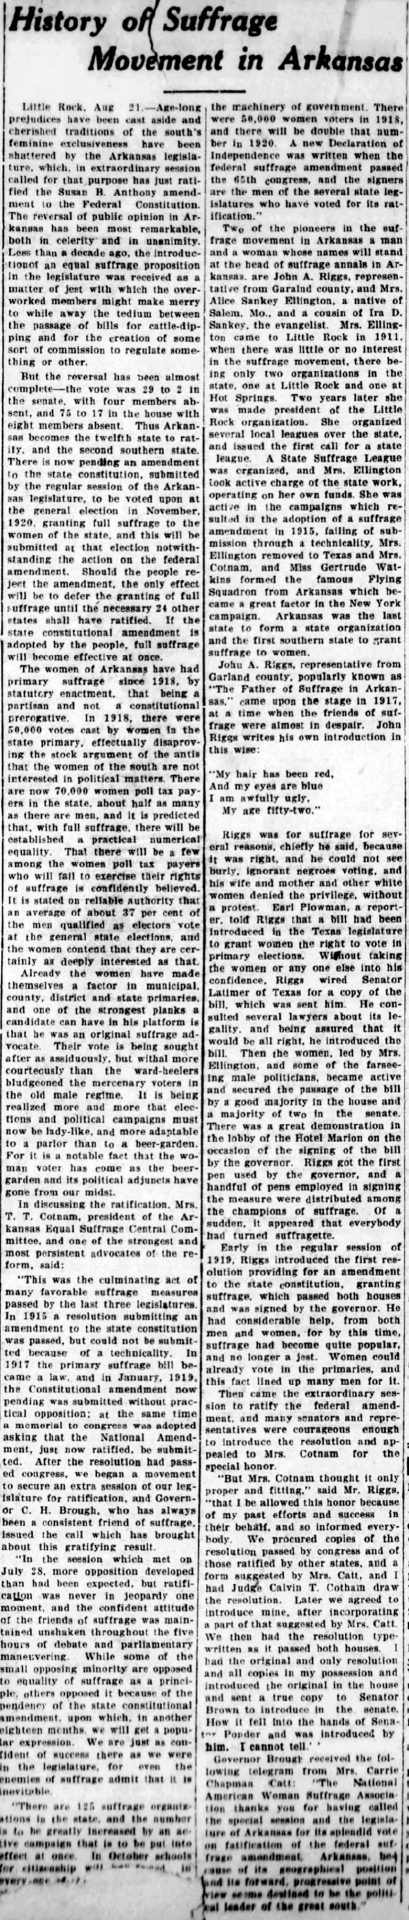 "History of Suffrage Movement in Arkansas" newspaper clipping